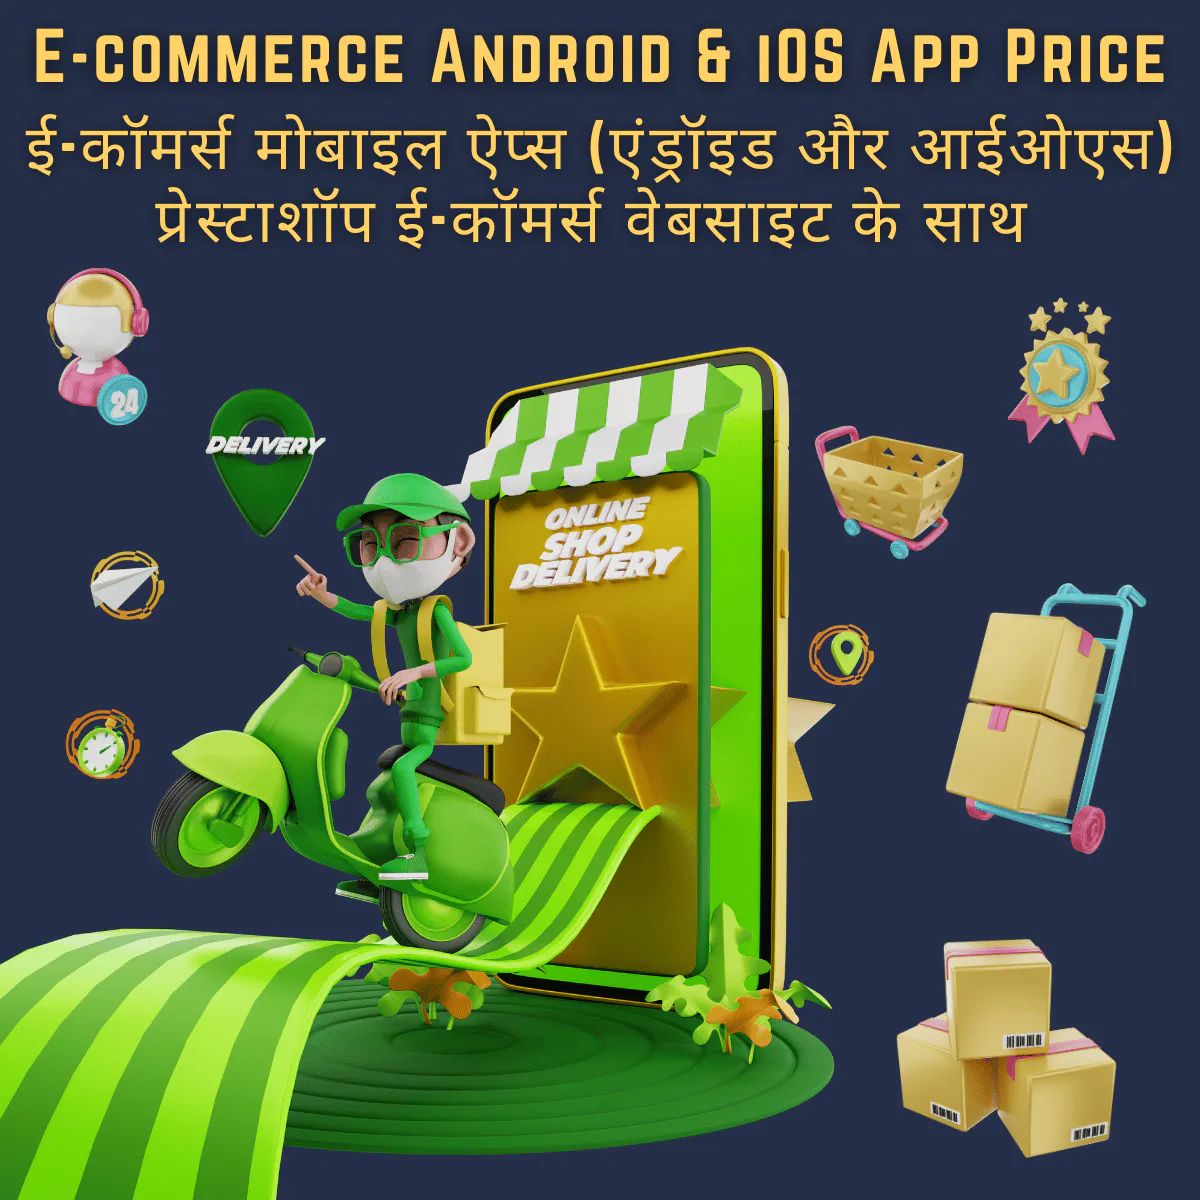 E-commerce Android & iOS App